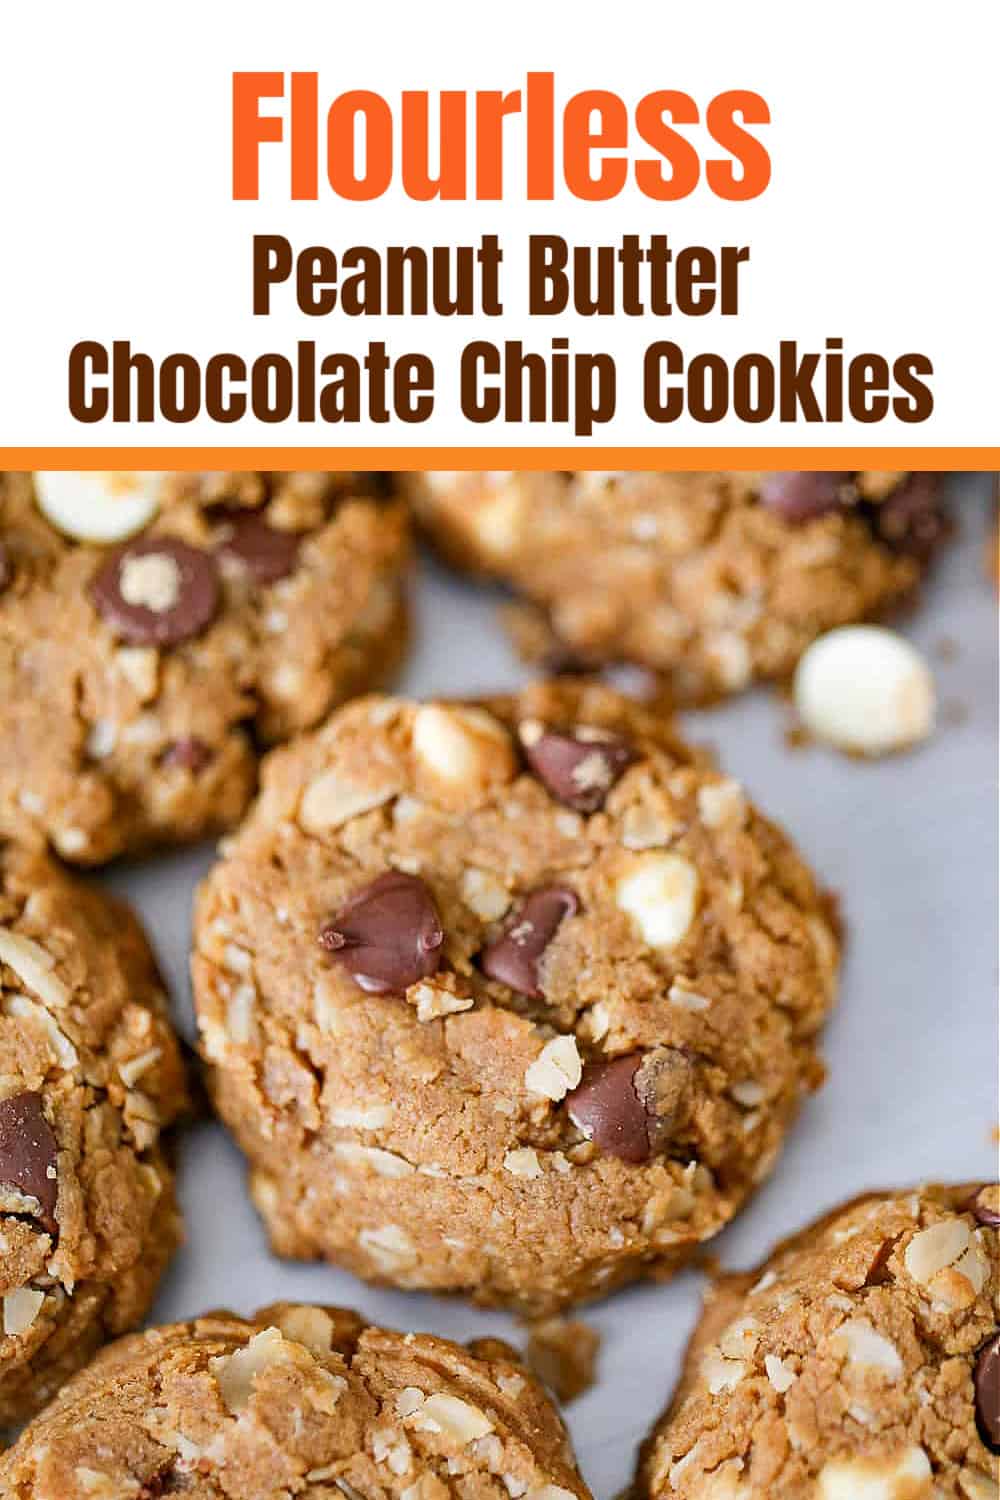 healthy Flourless Peanut Butter Chocolate Chip Cookies recipe